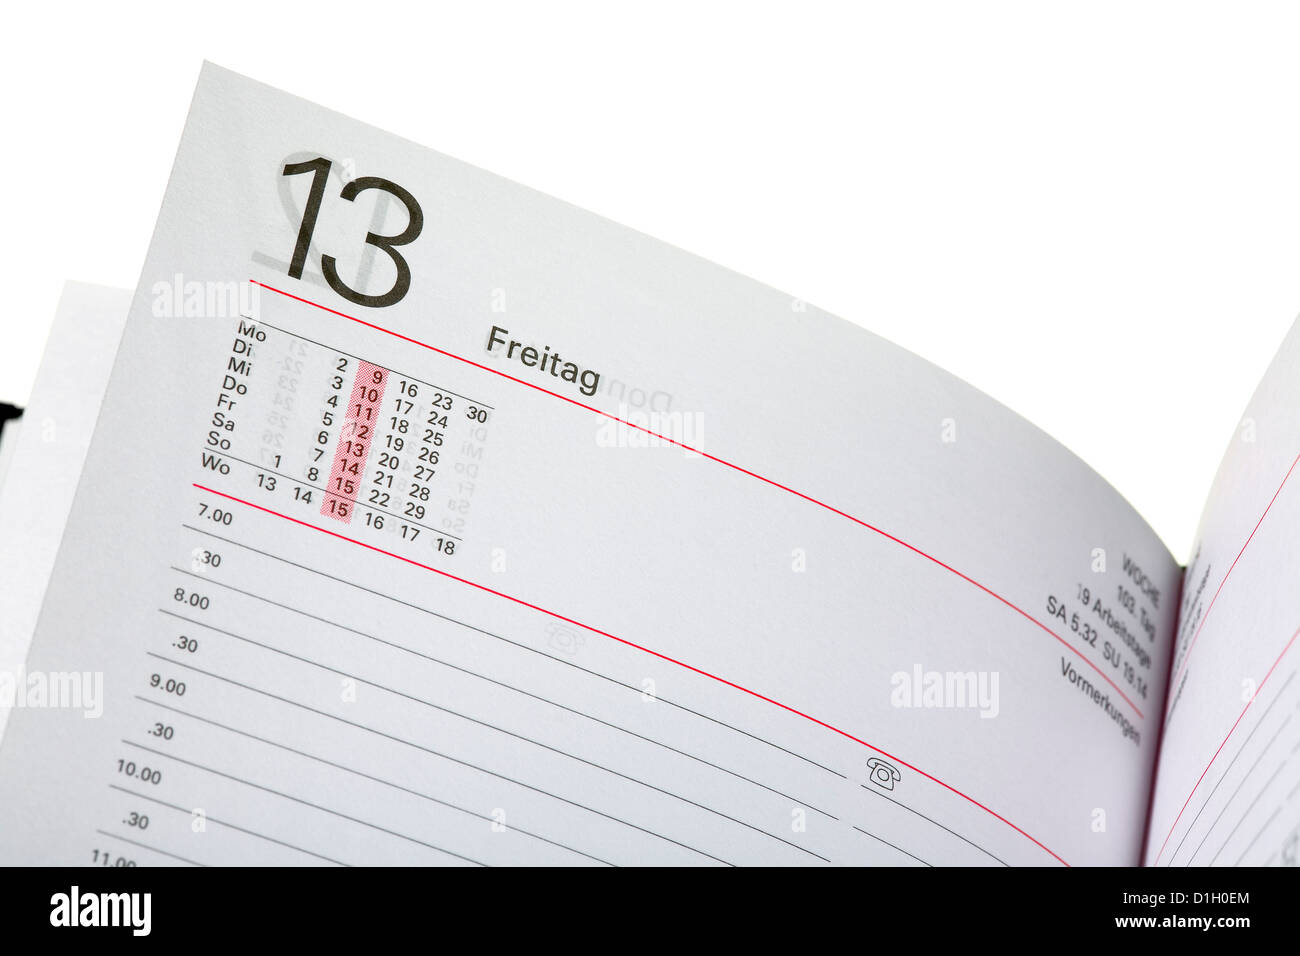 Close up of a open diary - 13 friday (german - Freitag), isolated on white background Stock Photo